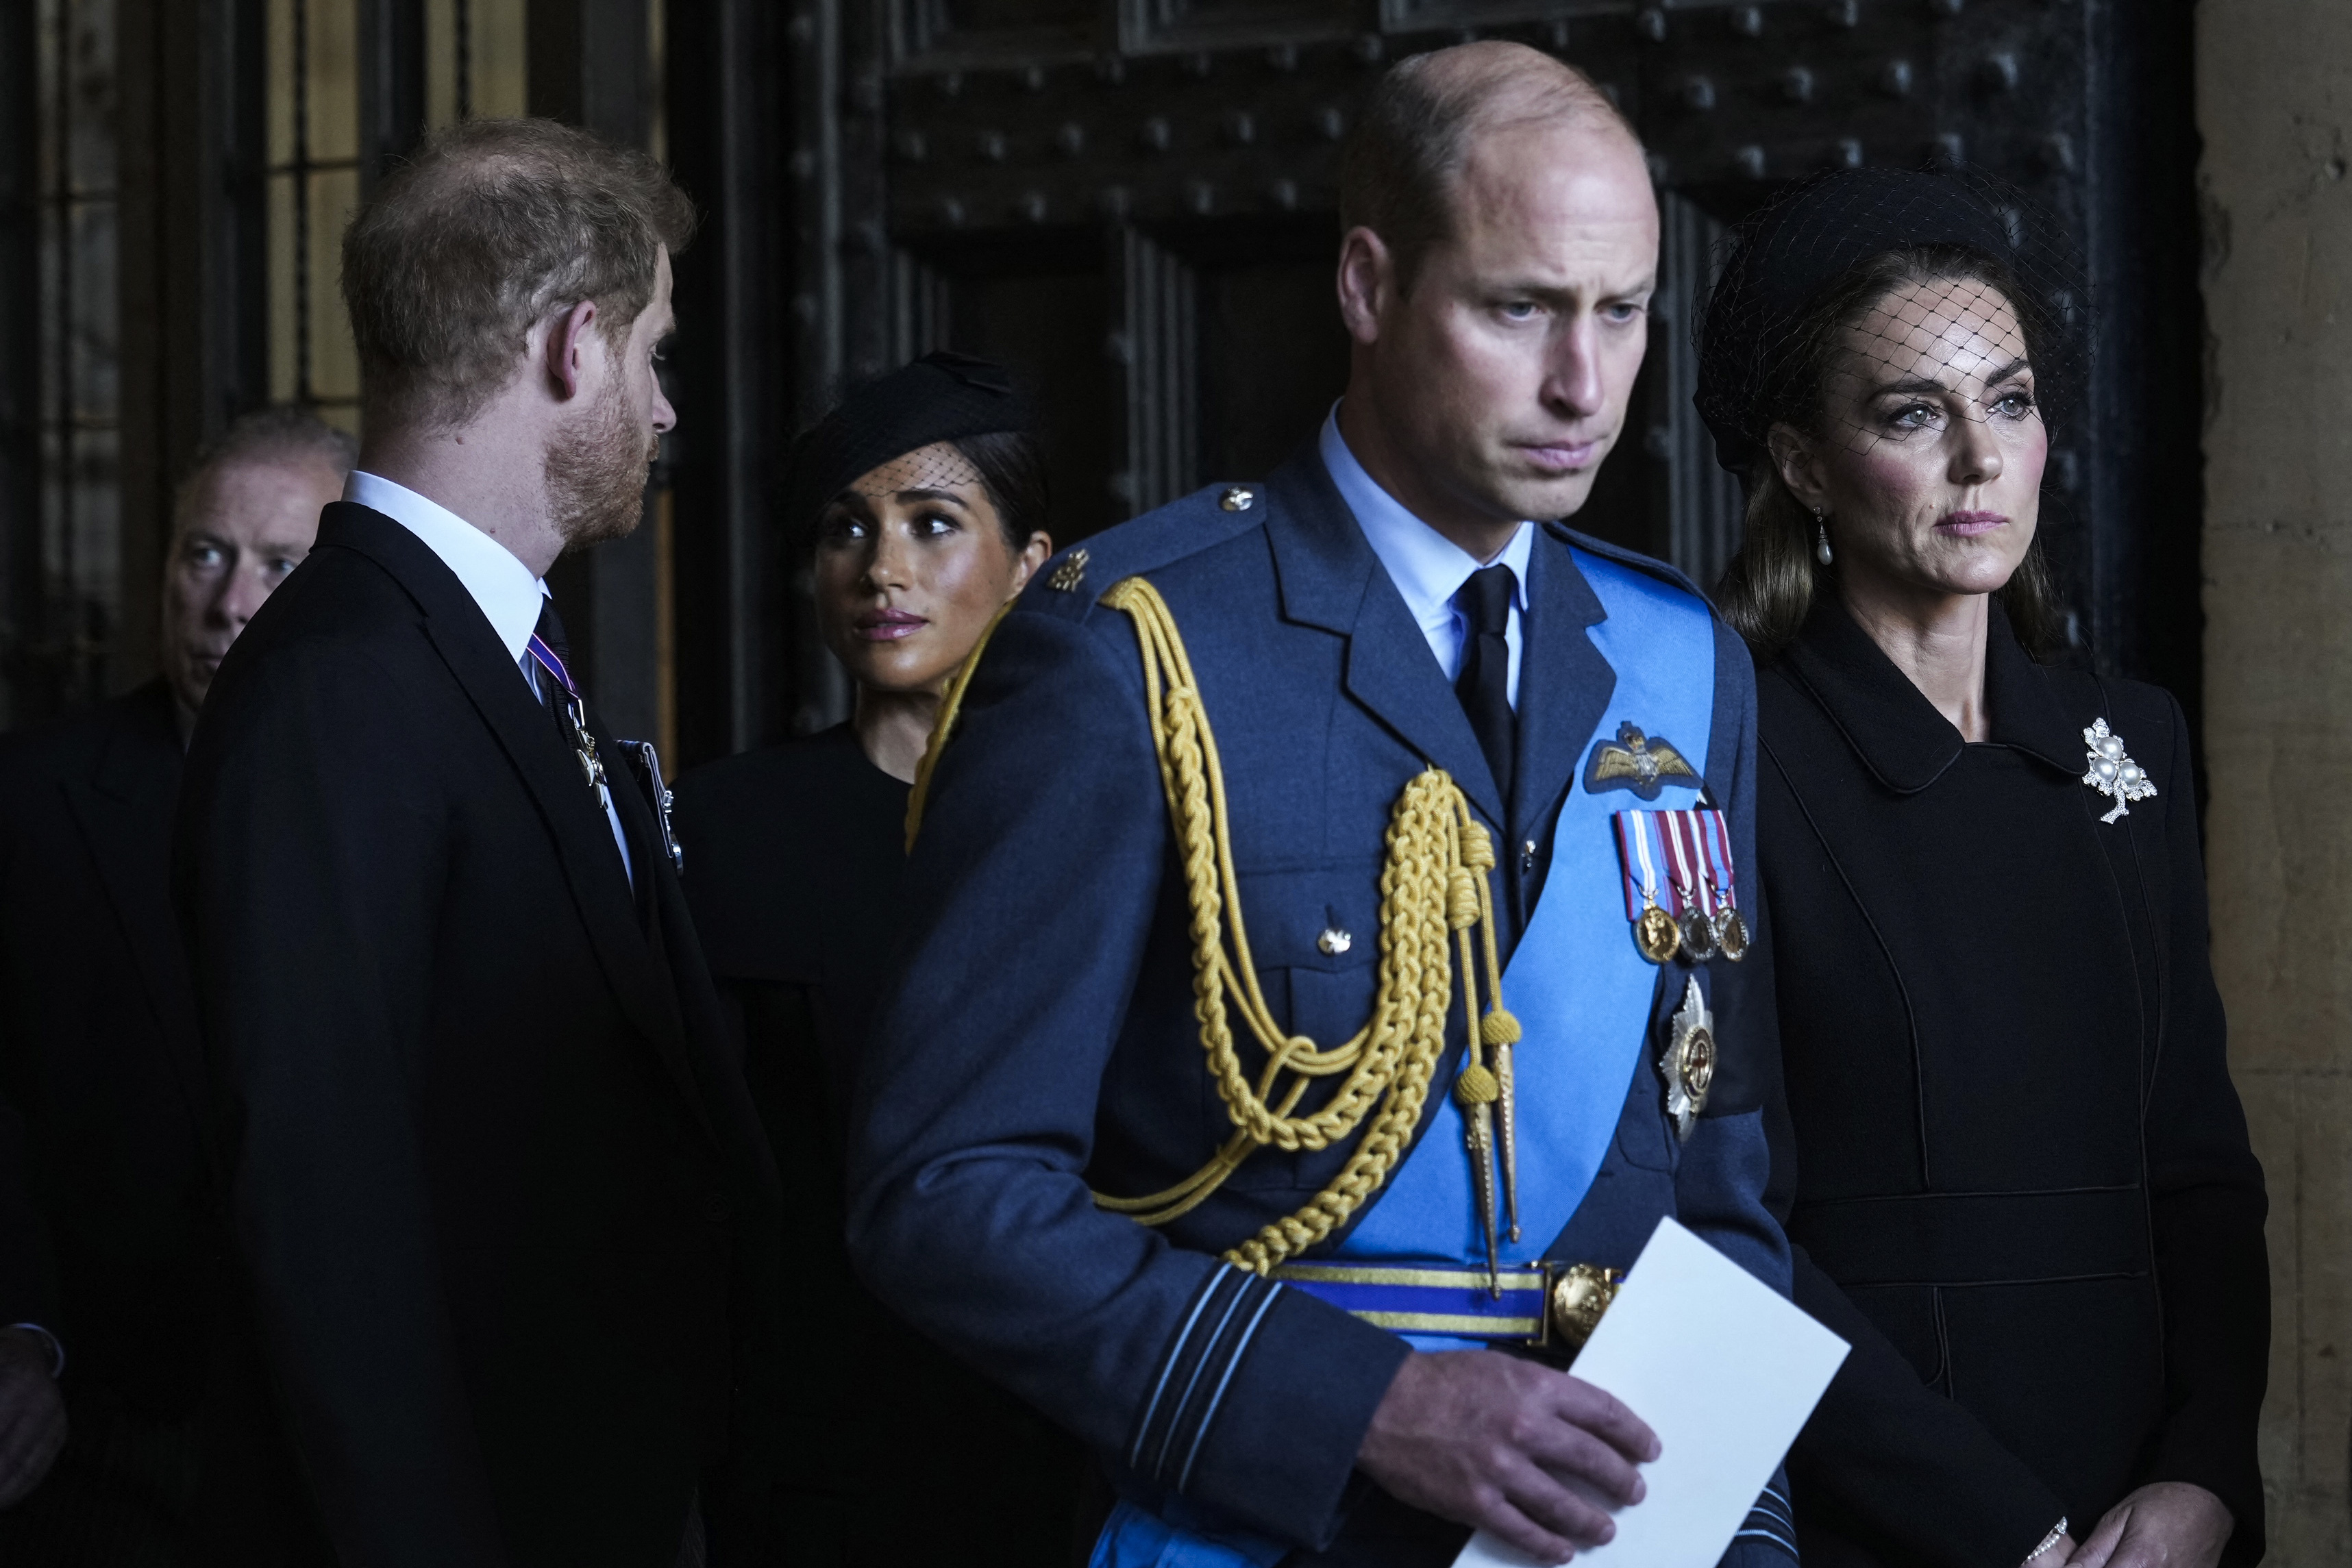 Prince William, Princess Catherine, Prince Harry, and Meghan Markle during the State Funeral of Queen Elizabeth II at Westminster Abbey on September 19, 2022 in London, England | Source: Getty Images